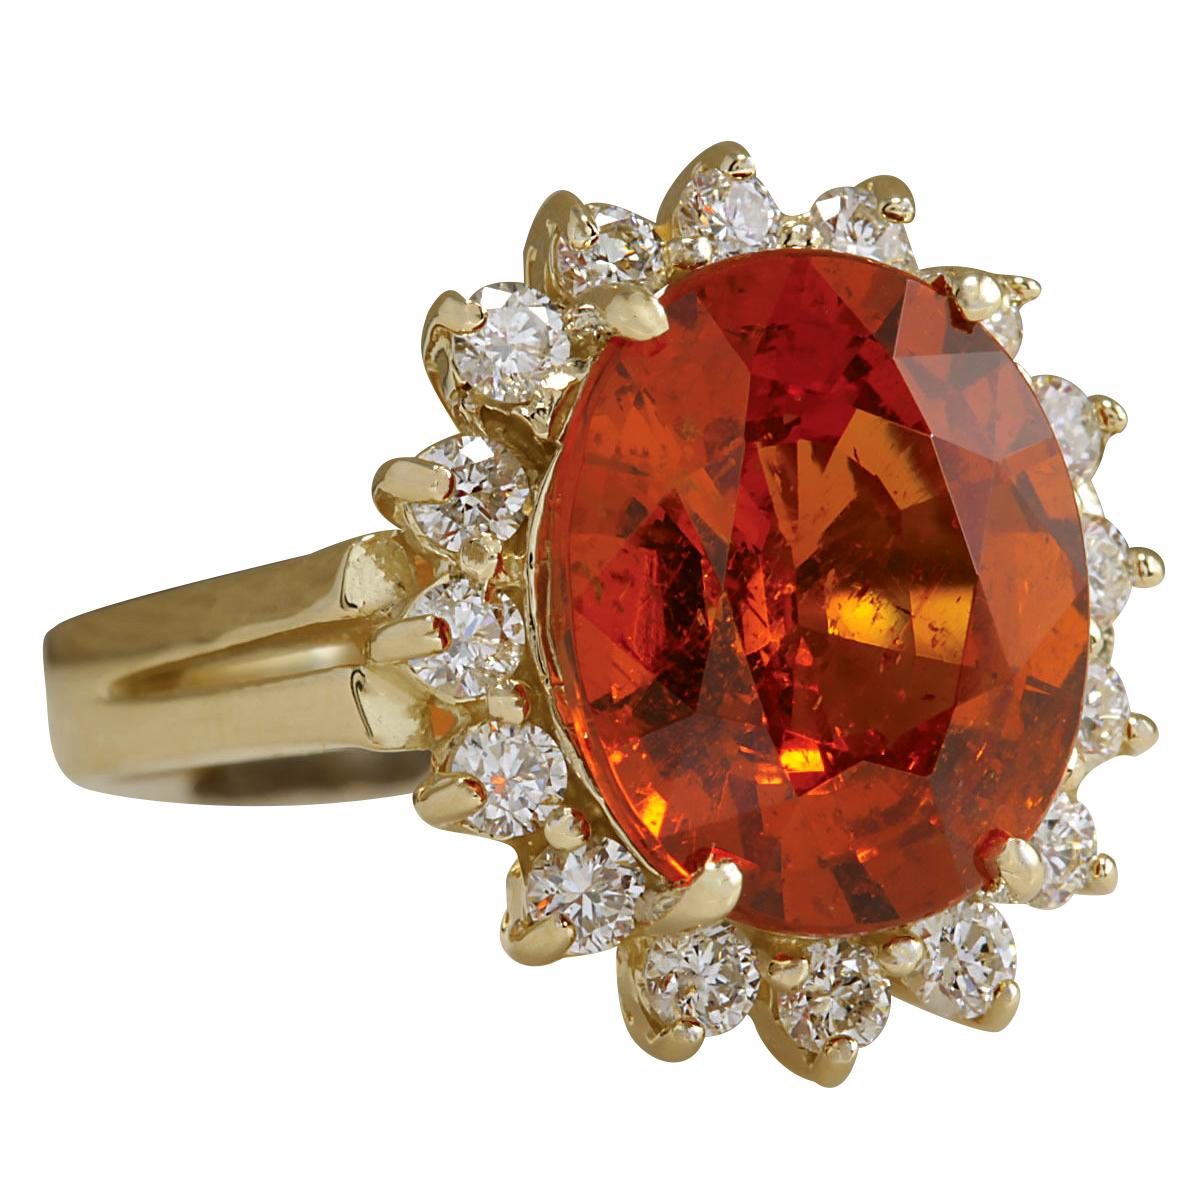 Stamped: 18K Yellow Gold<br>Total Ring Weight: 6.0 Grams<br>Ring Length: N/A<br>Ring Width: N/A<br>Gemstone Weight: Total Natural Mandarin Garnet Weight is 6.36 Carat (Measures: 12.22x10.05 mm)<br>Color: Orange<br>Diamond Weight: Total Natural